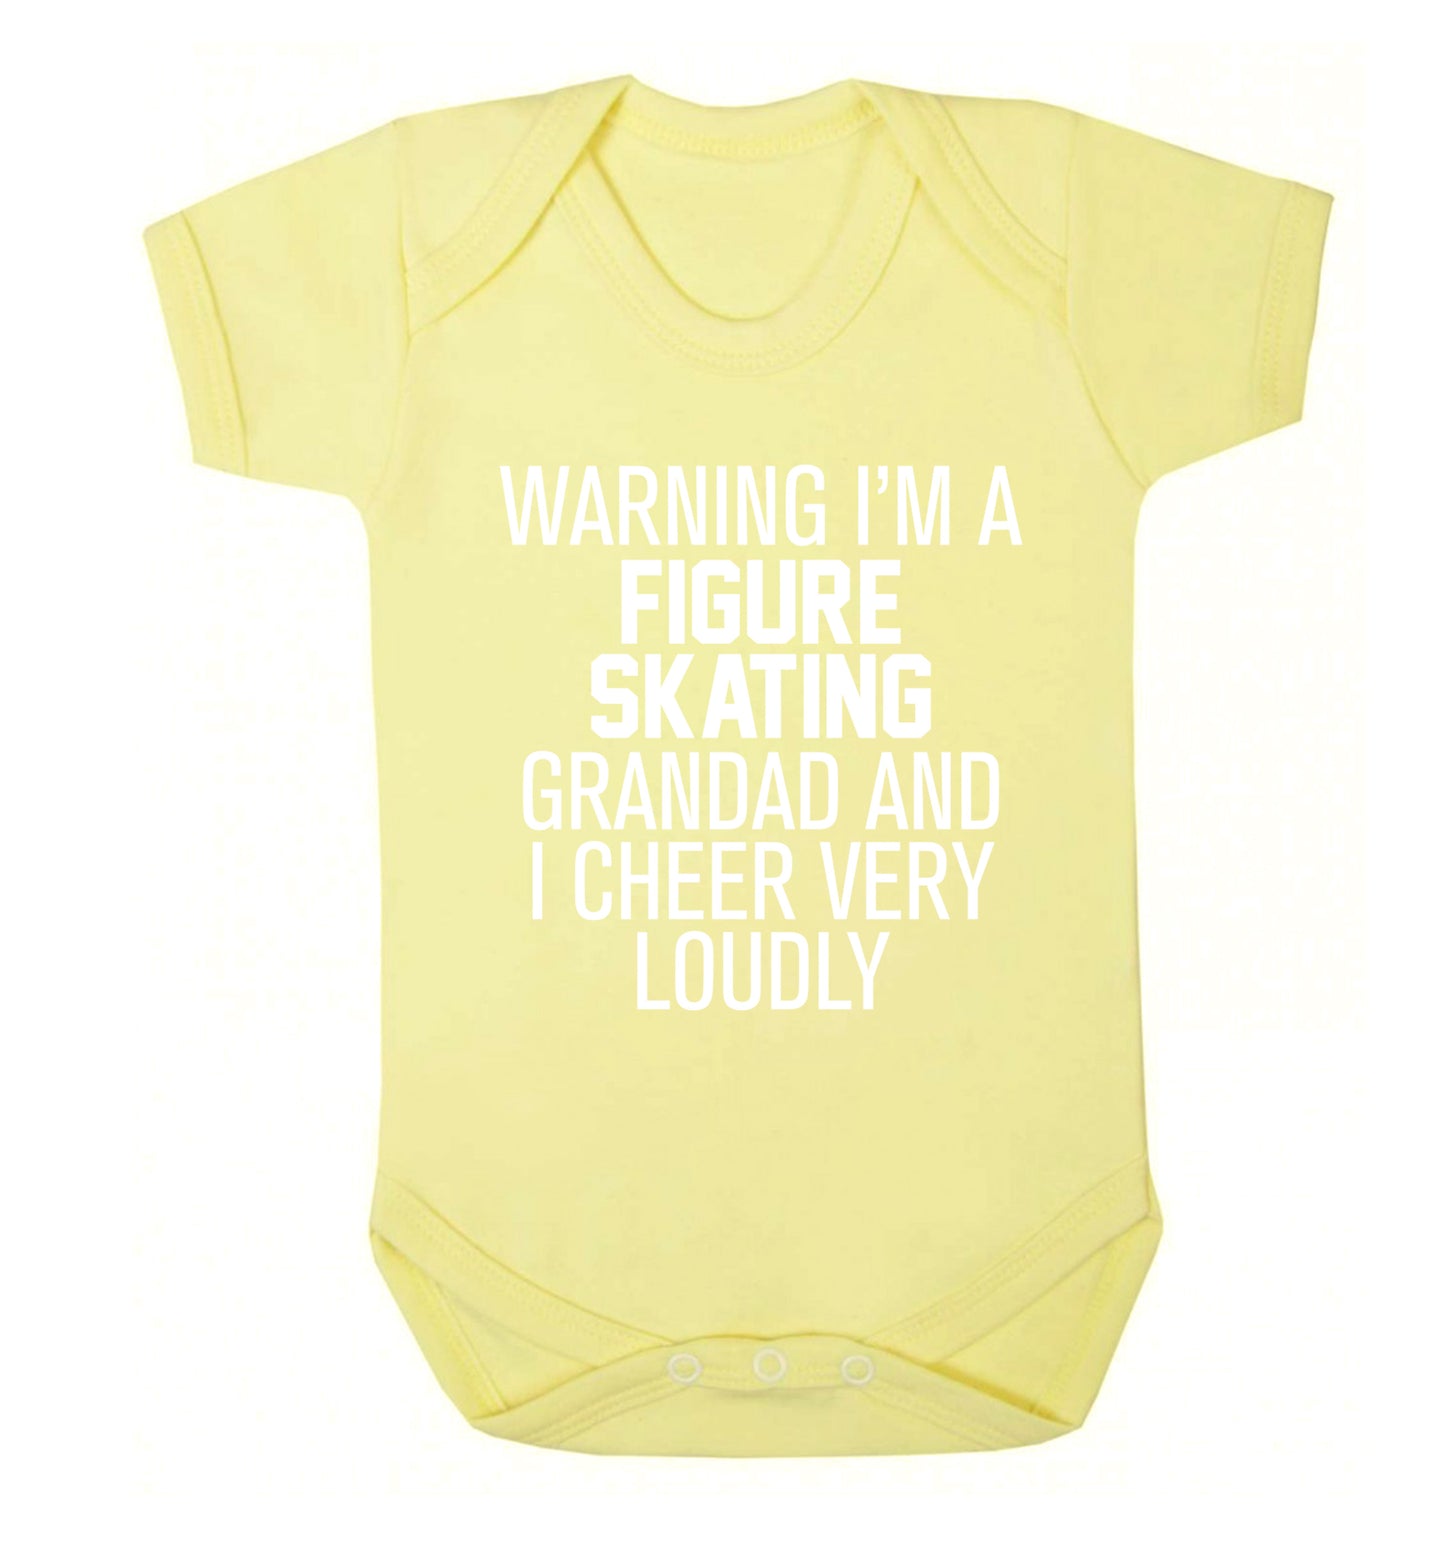 Warning I'm a figure skating grandad and I cheer very loudly Baby Vest pale yellow 18-24 months